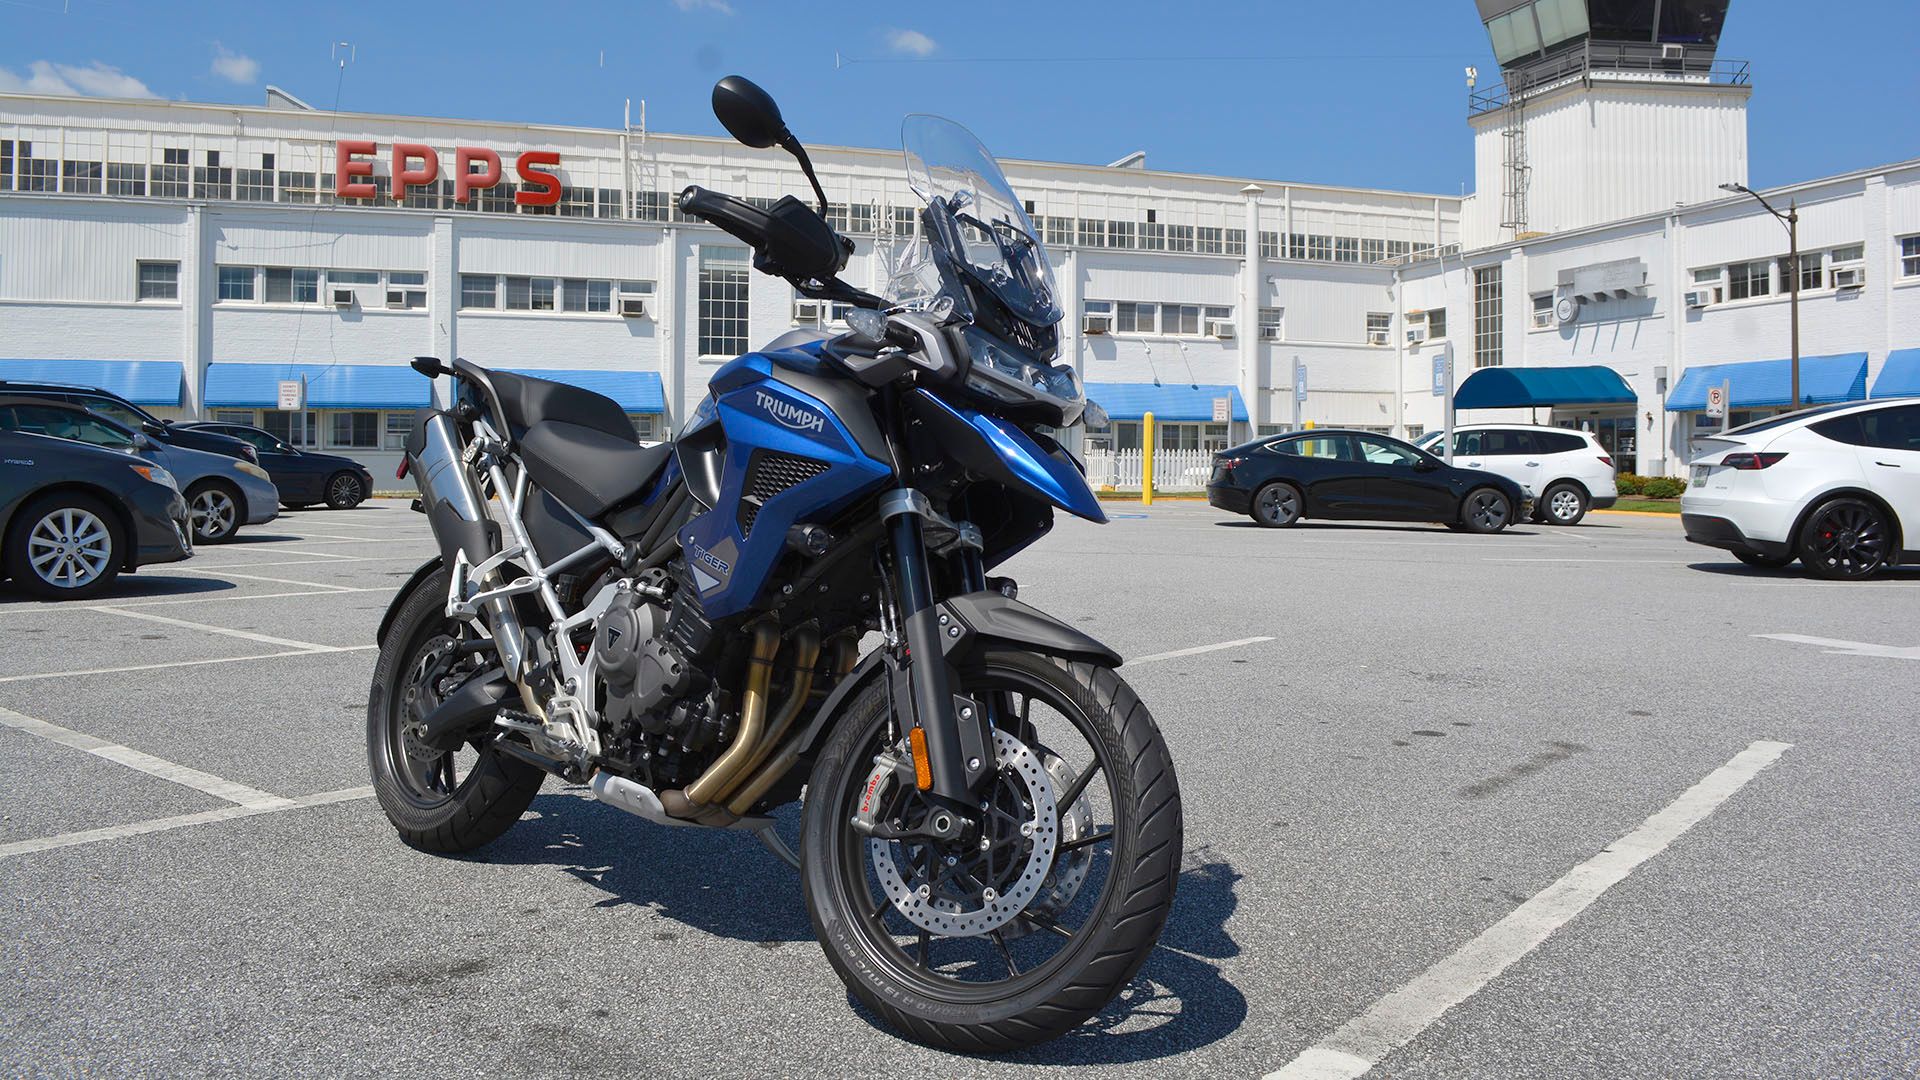 2023 Triumph Tiger 1200 GT Pro parked at airport.